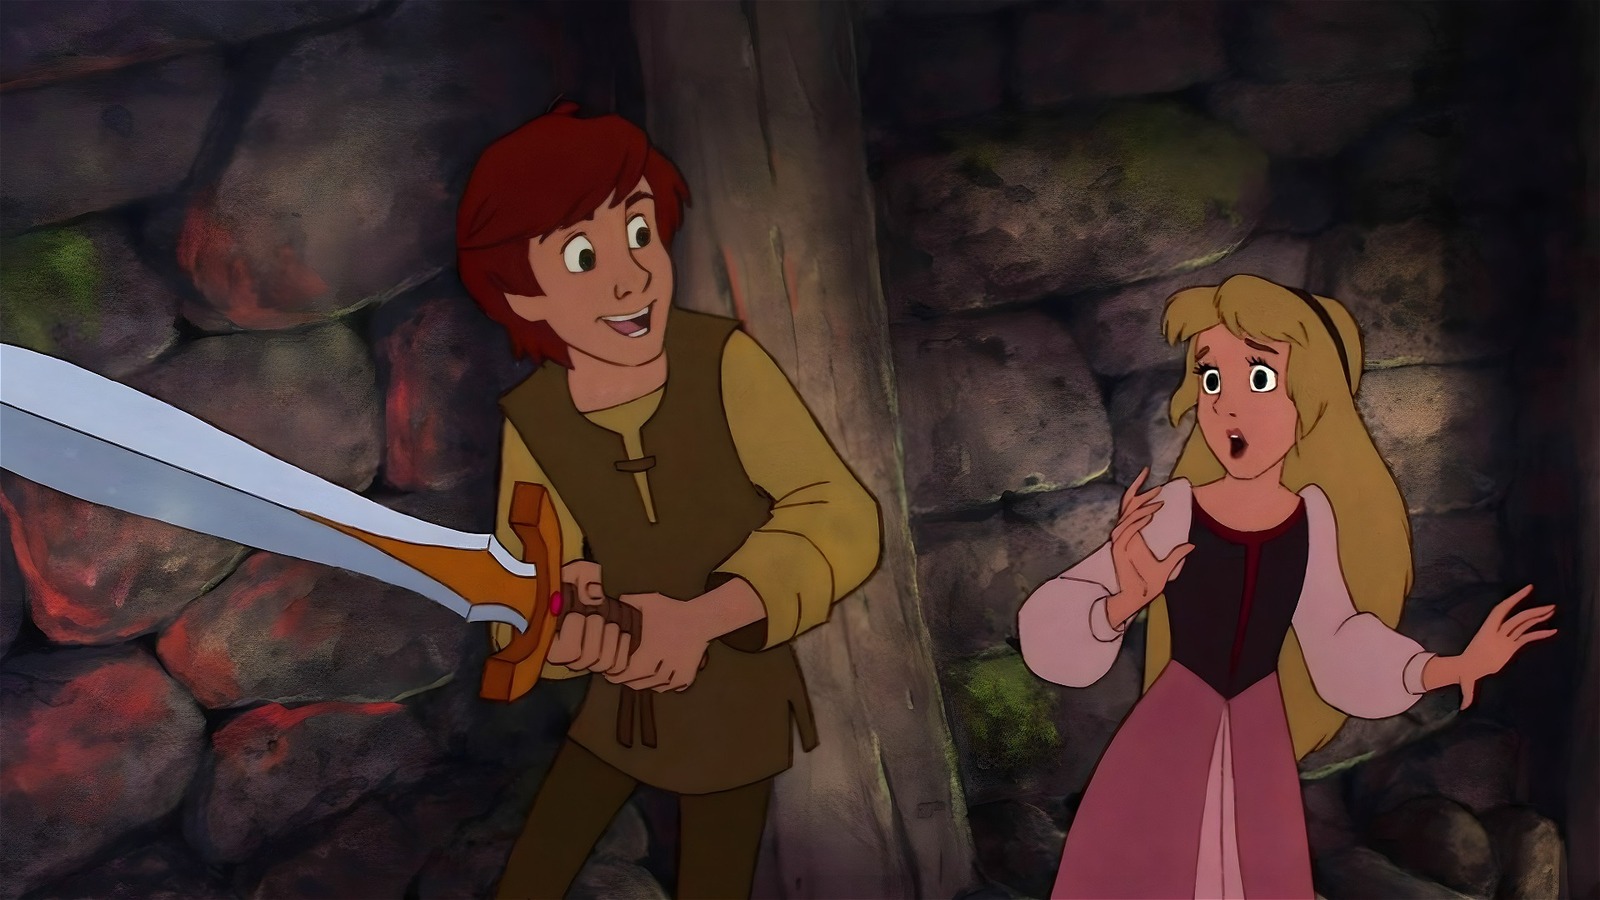 Forget Little Mermaid, The Disney Remake We Need Is The Black Cauldron (If It Follows The Books) – Looper